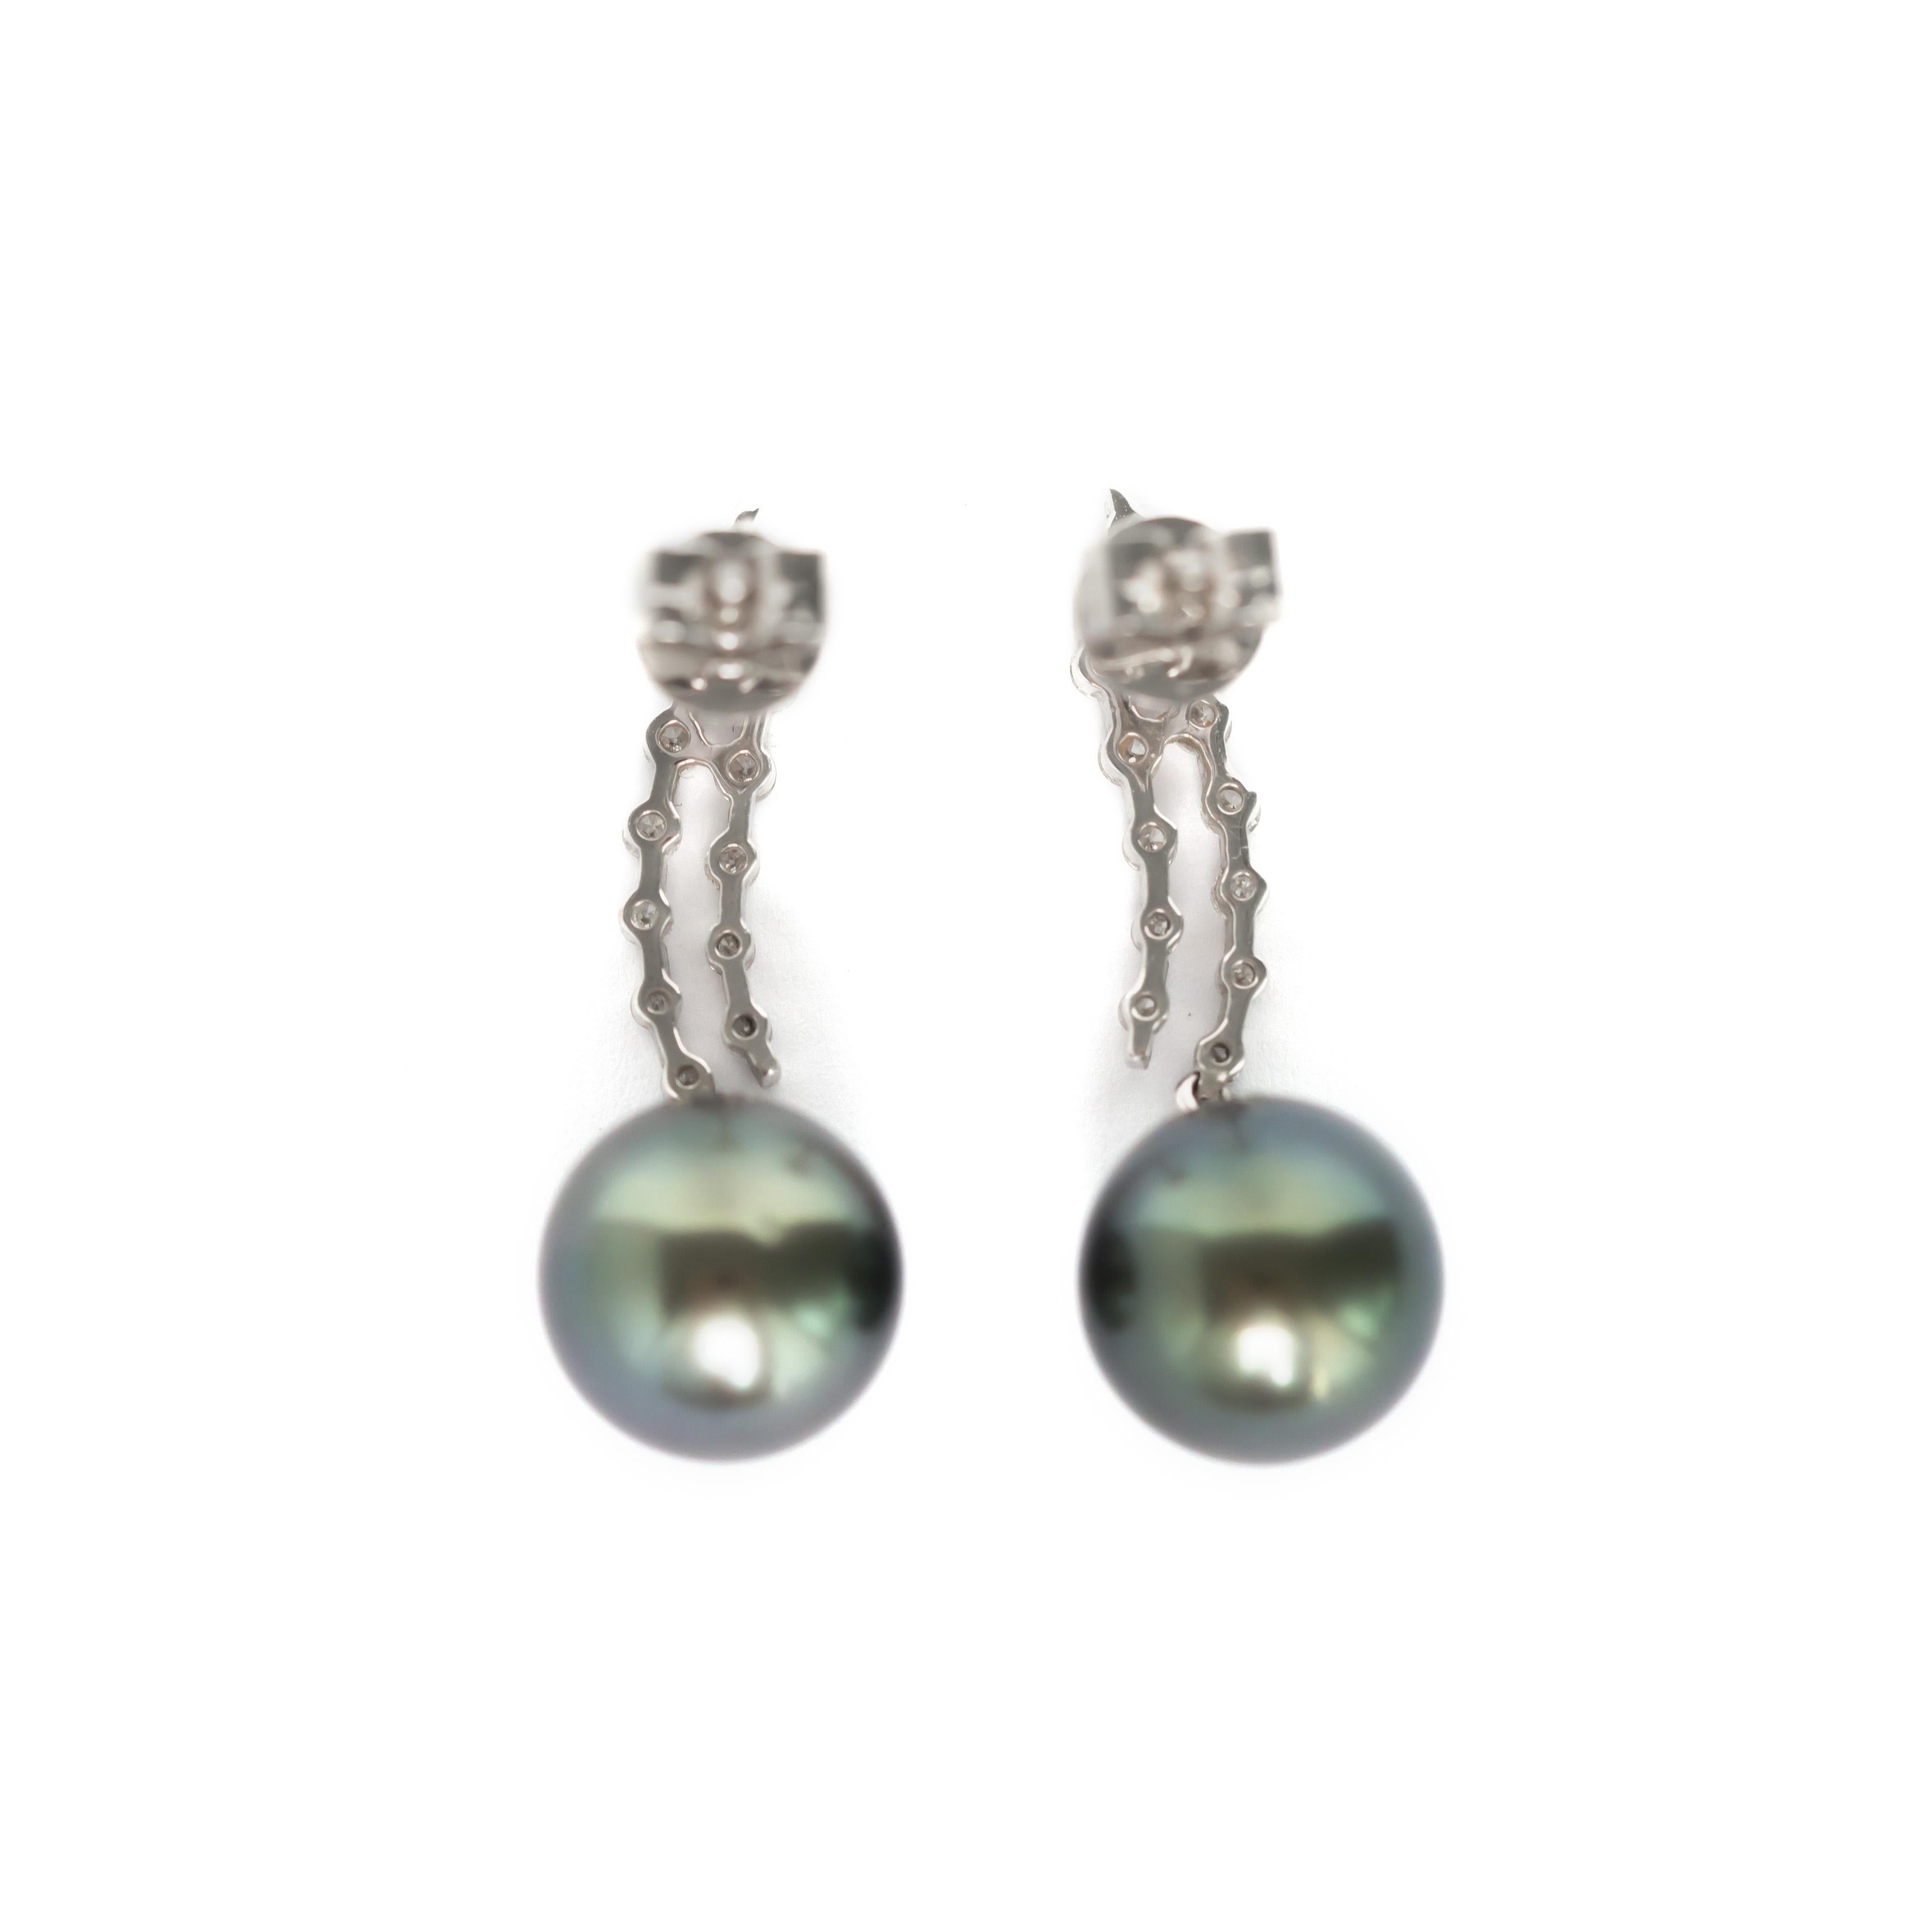 Contemporary Diamond and Pearl Earrings and Pendant Set